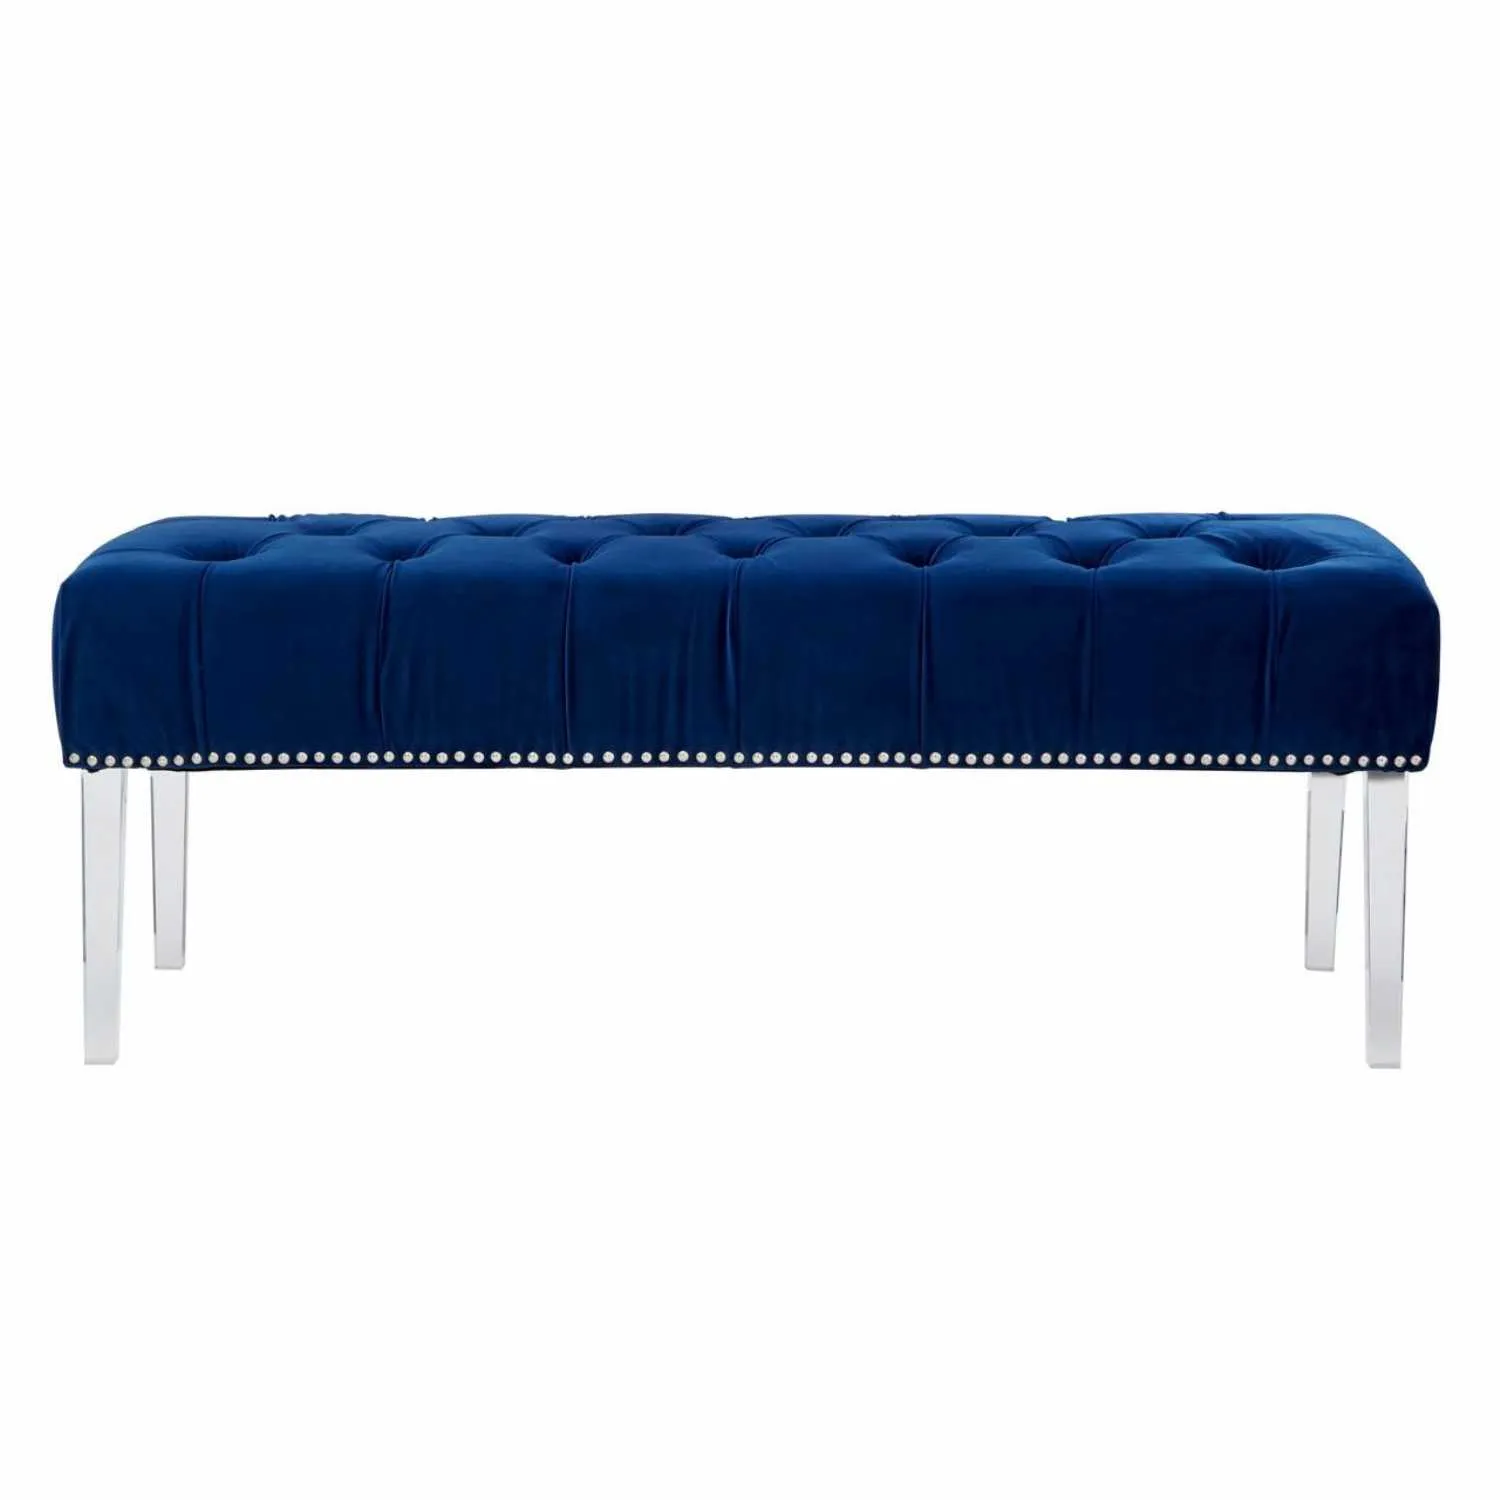 Blue Button Tufted Velvet Fabric Bench With Acrylic Legs